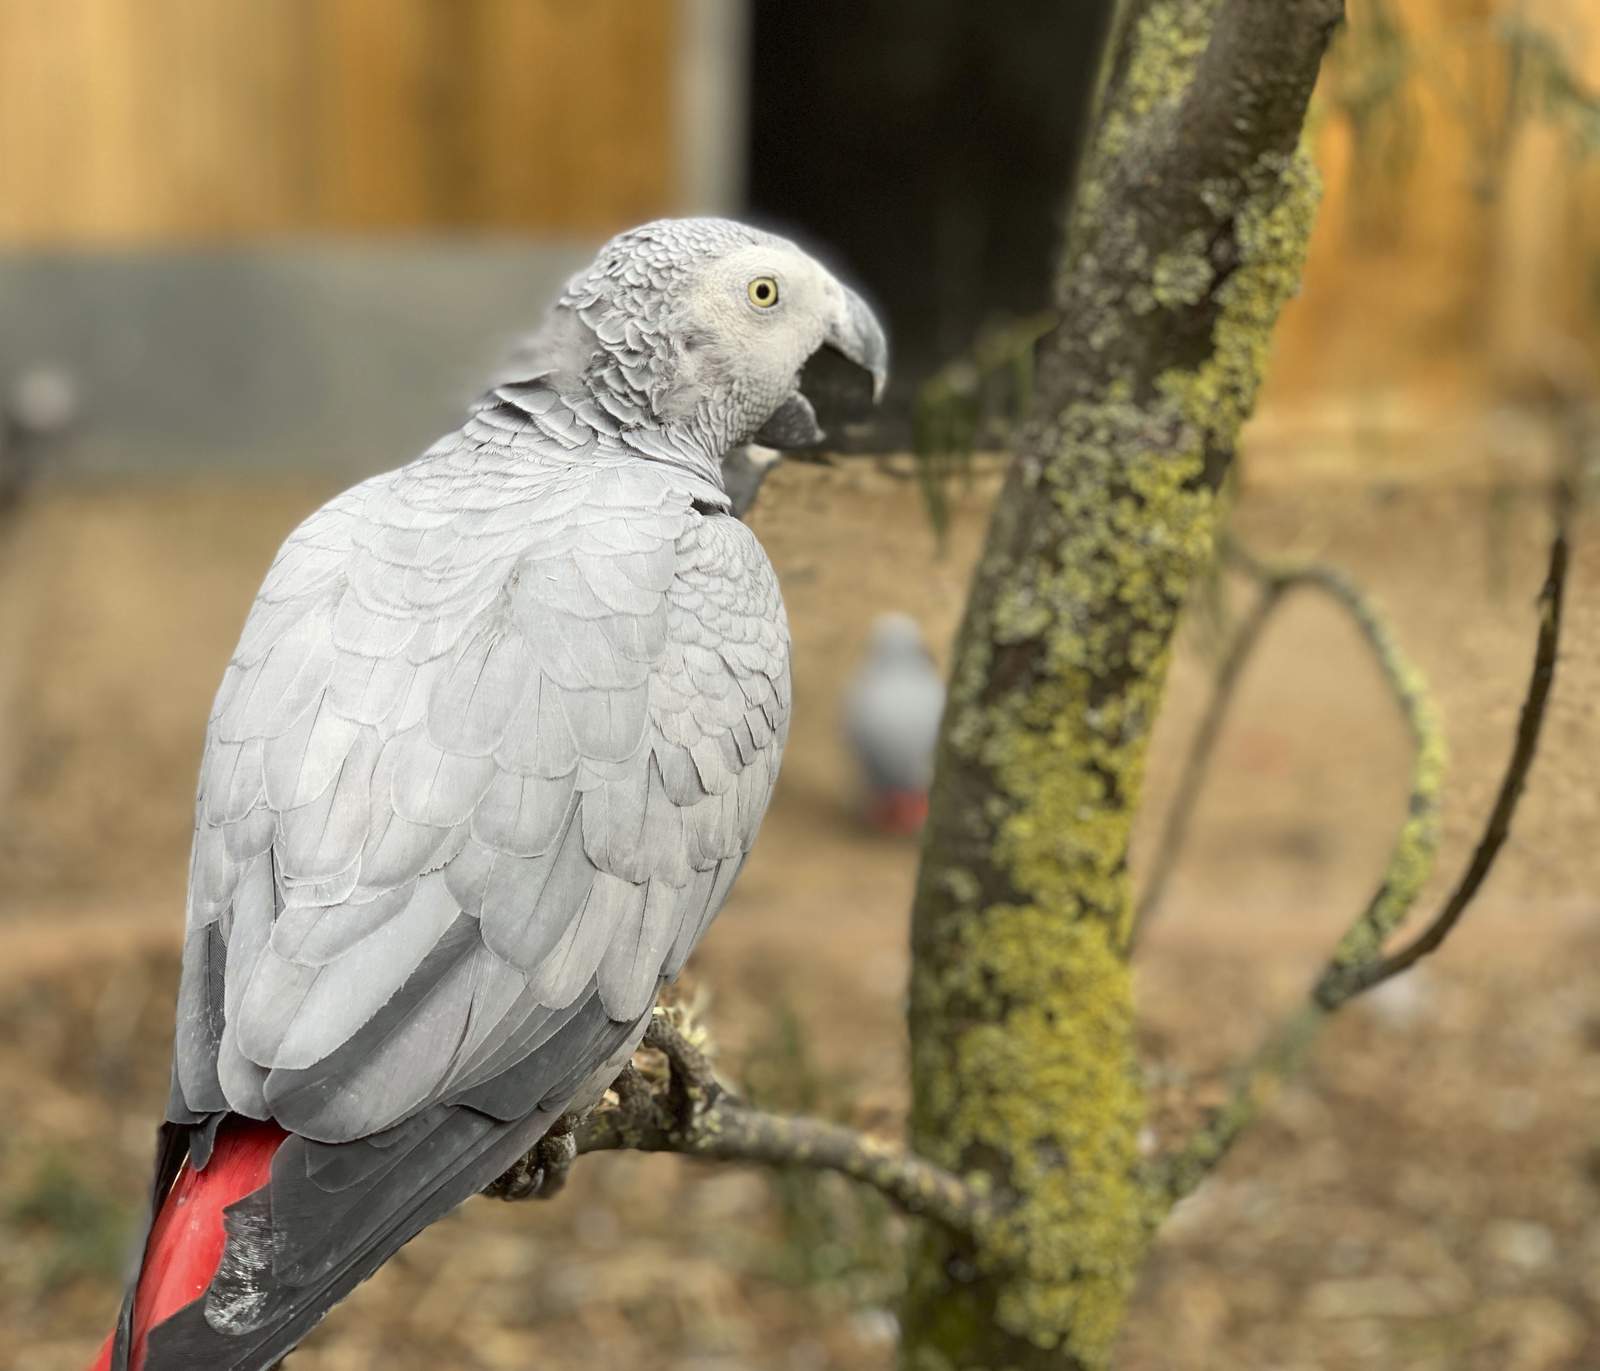 Gray parrots separated at zoo after swearing